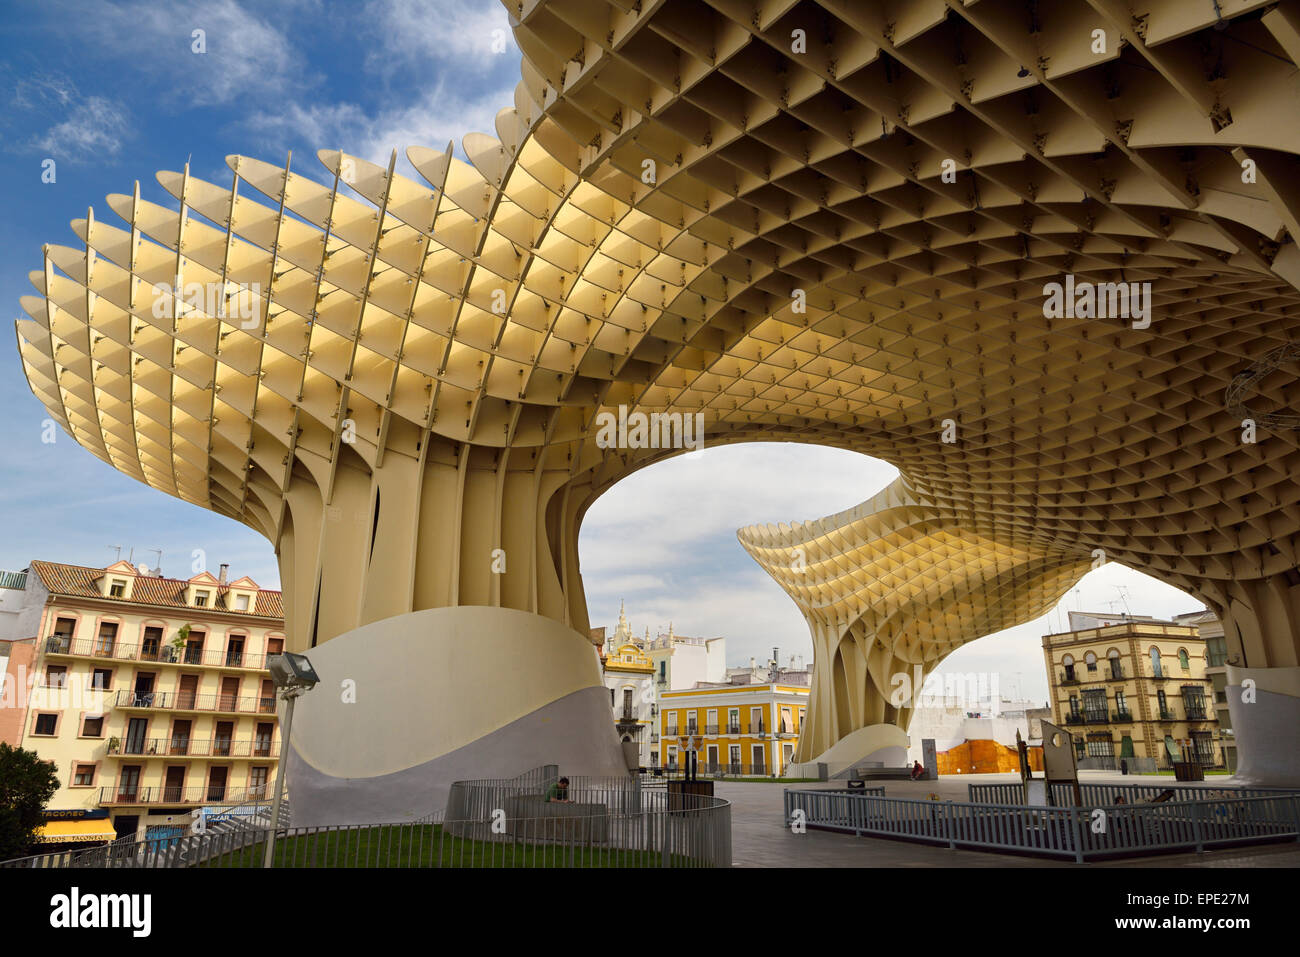 Mushroom canopy modern architecture of Metropol Parasol at Plaza of the Incarnation Seville Spain Stock Photo